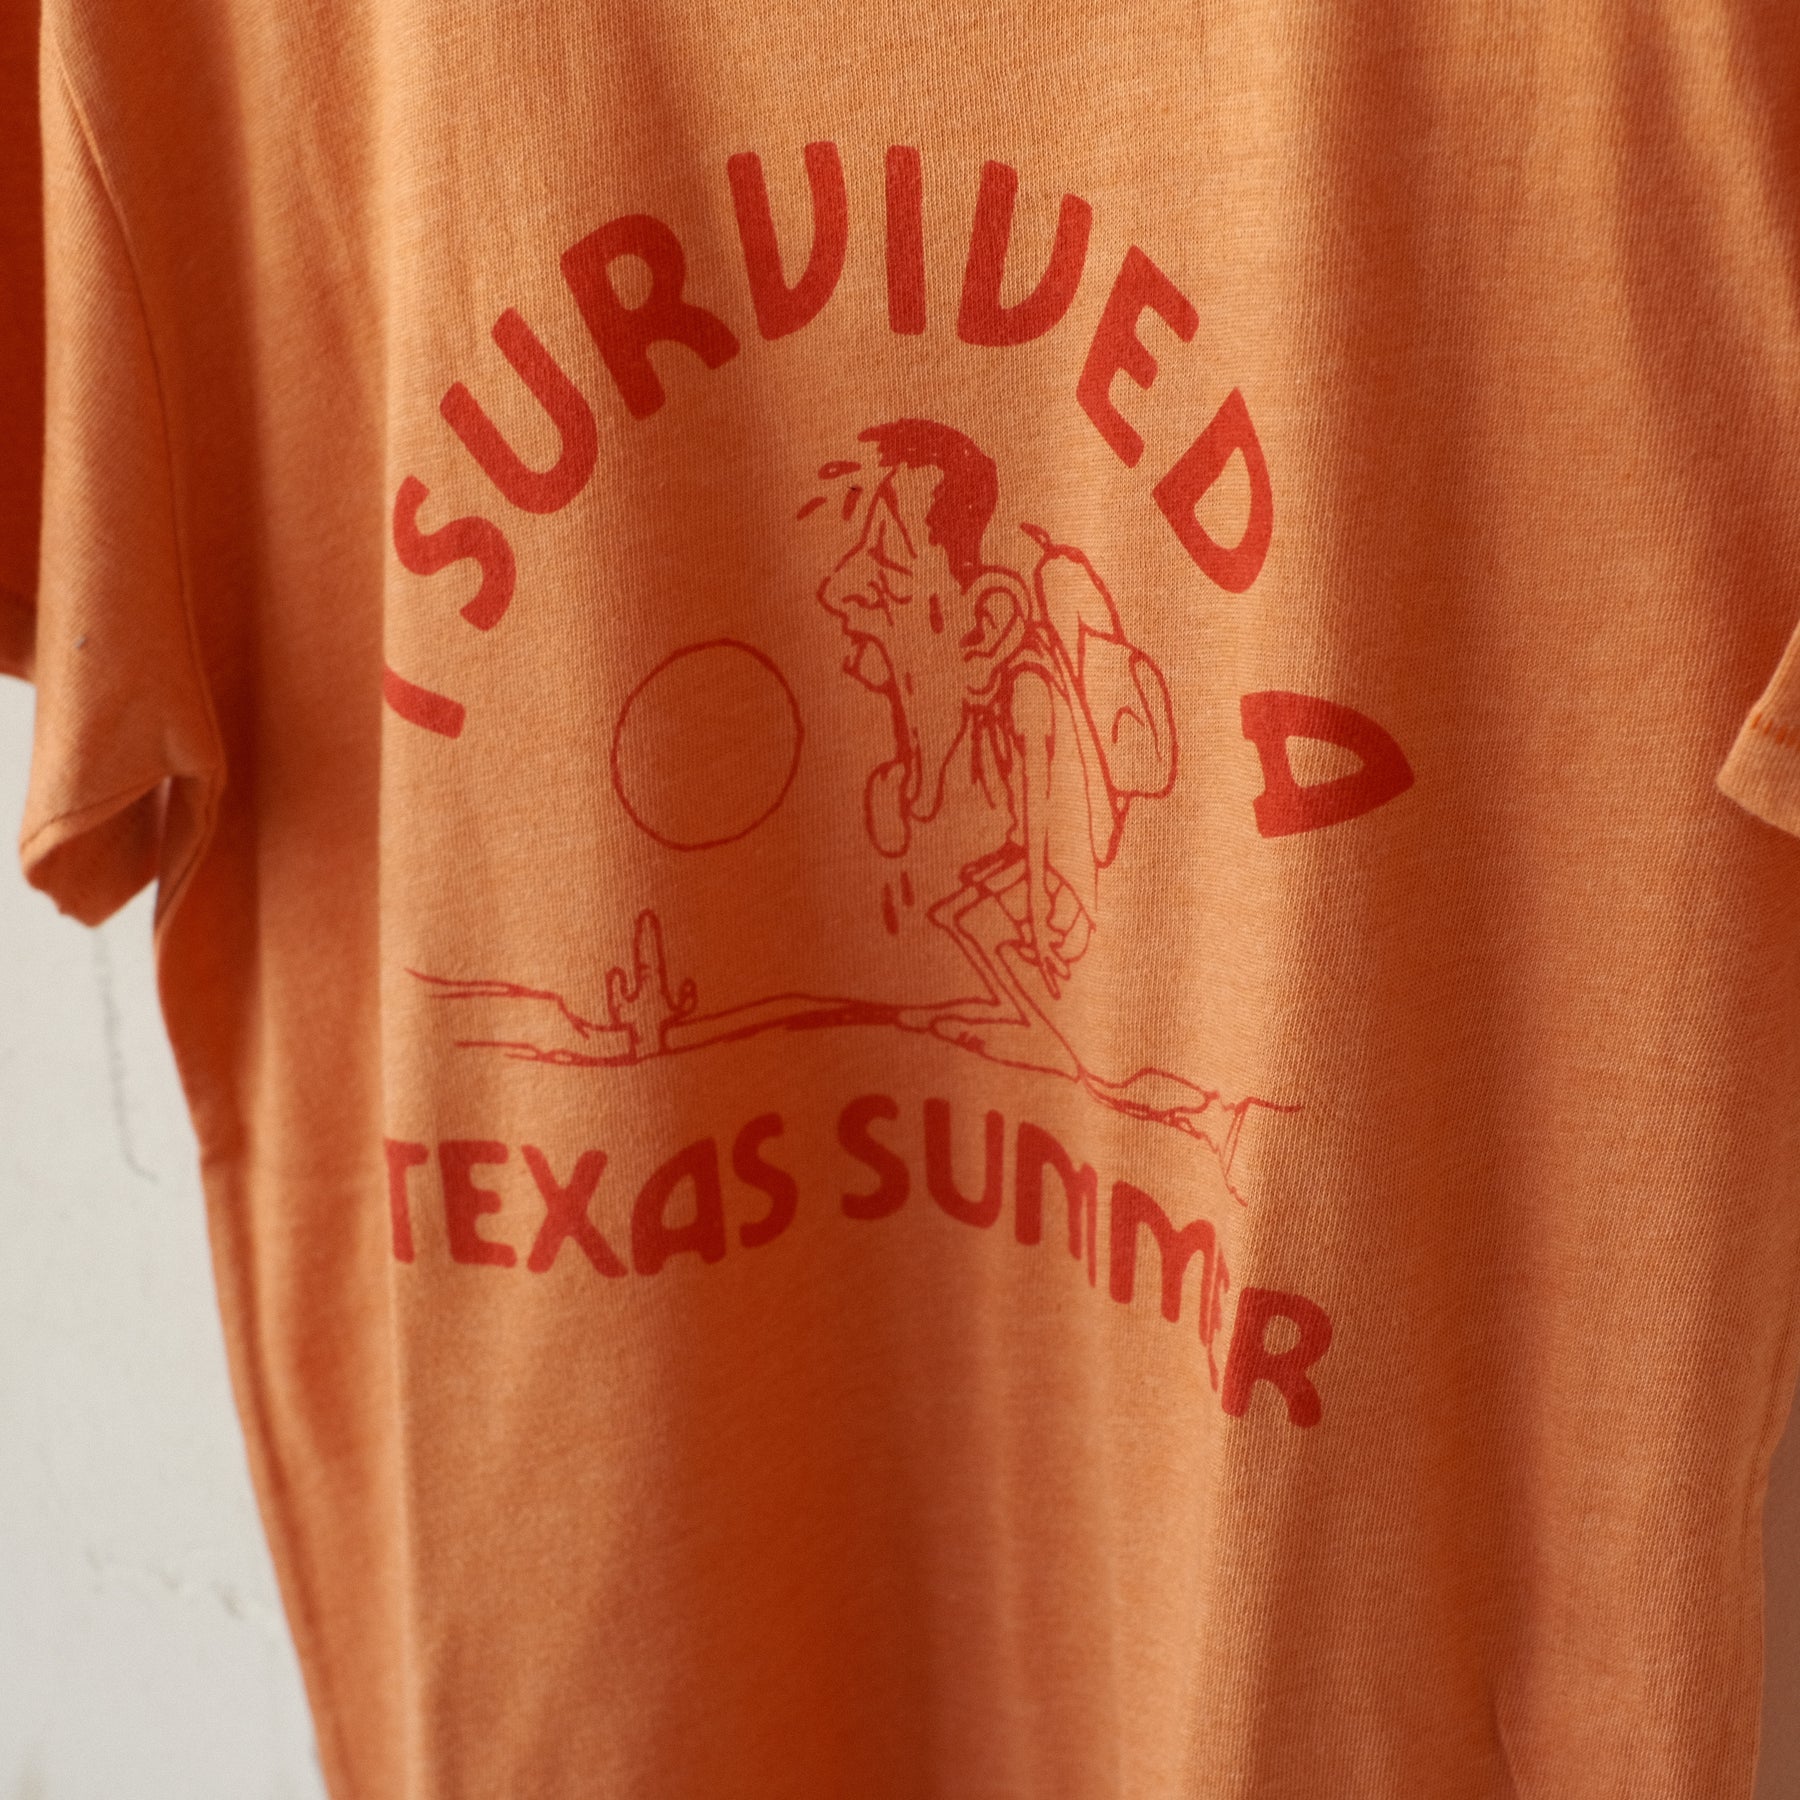 I Survived a Texas Summer Graphic T-Shirt